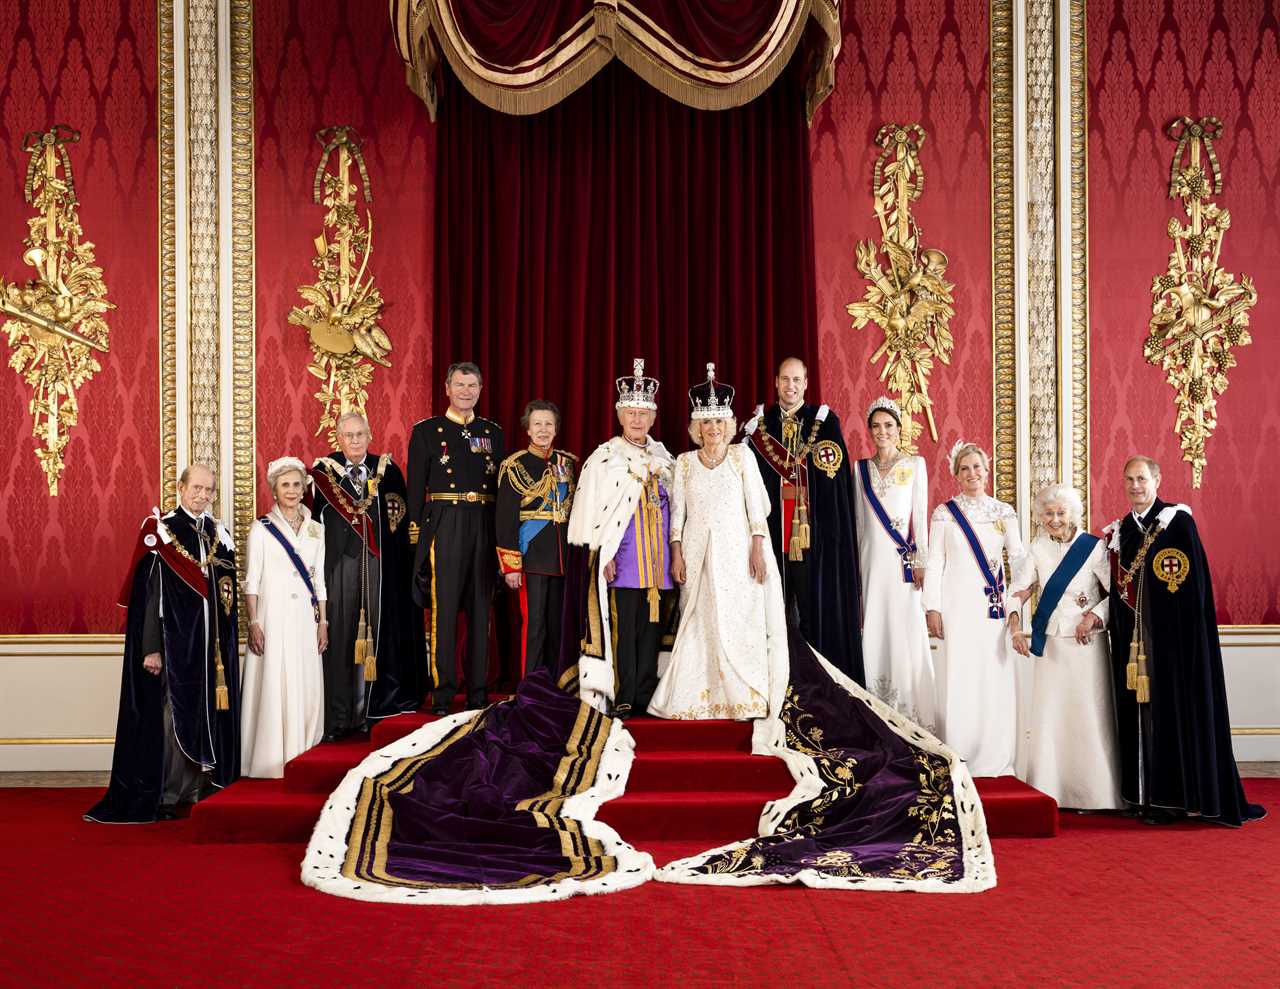 Princess Kate’s coronation dress revealed in full as she beams alongside Queen Camilla & Prince William in portrait